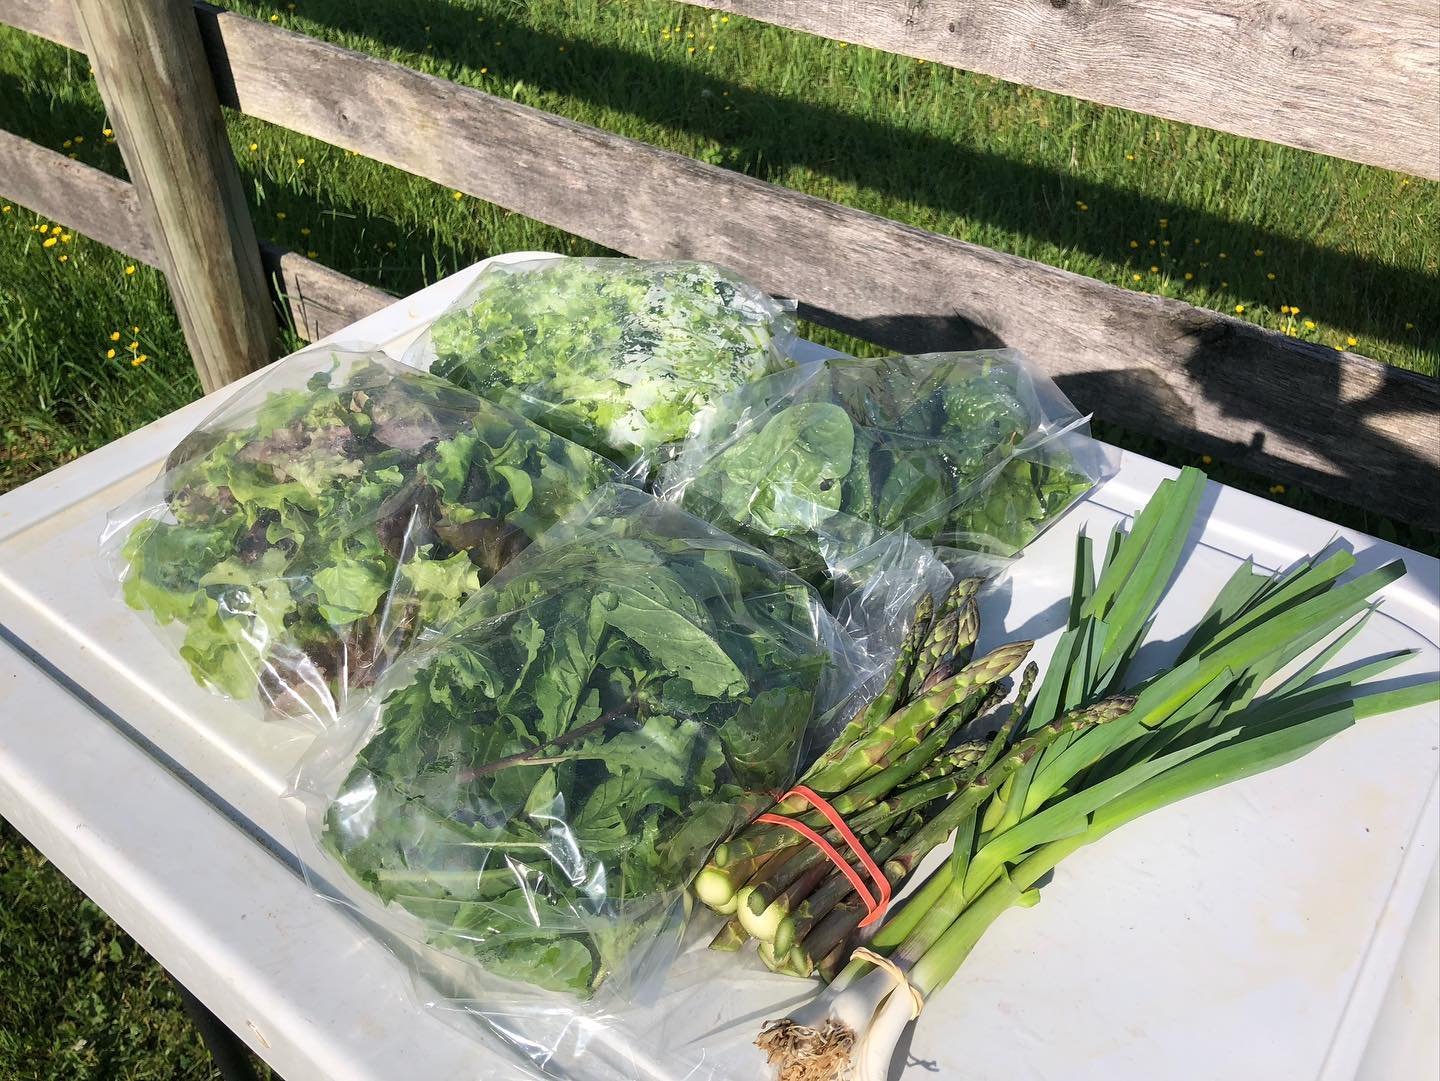 Week four CSA: Lettuce, Arugula, Spinach, Green Garlic. Peas are flowering and breaking ground for four new garden beds!